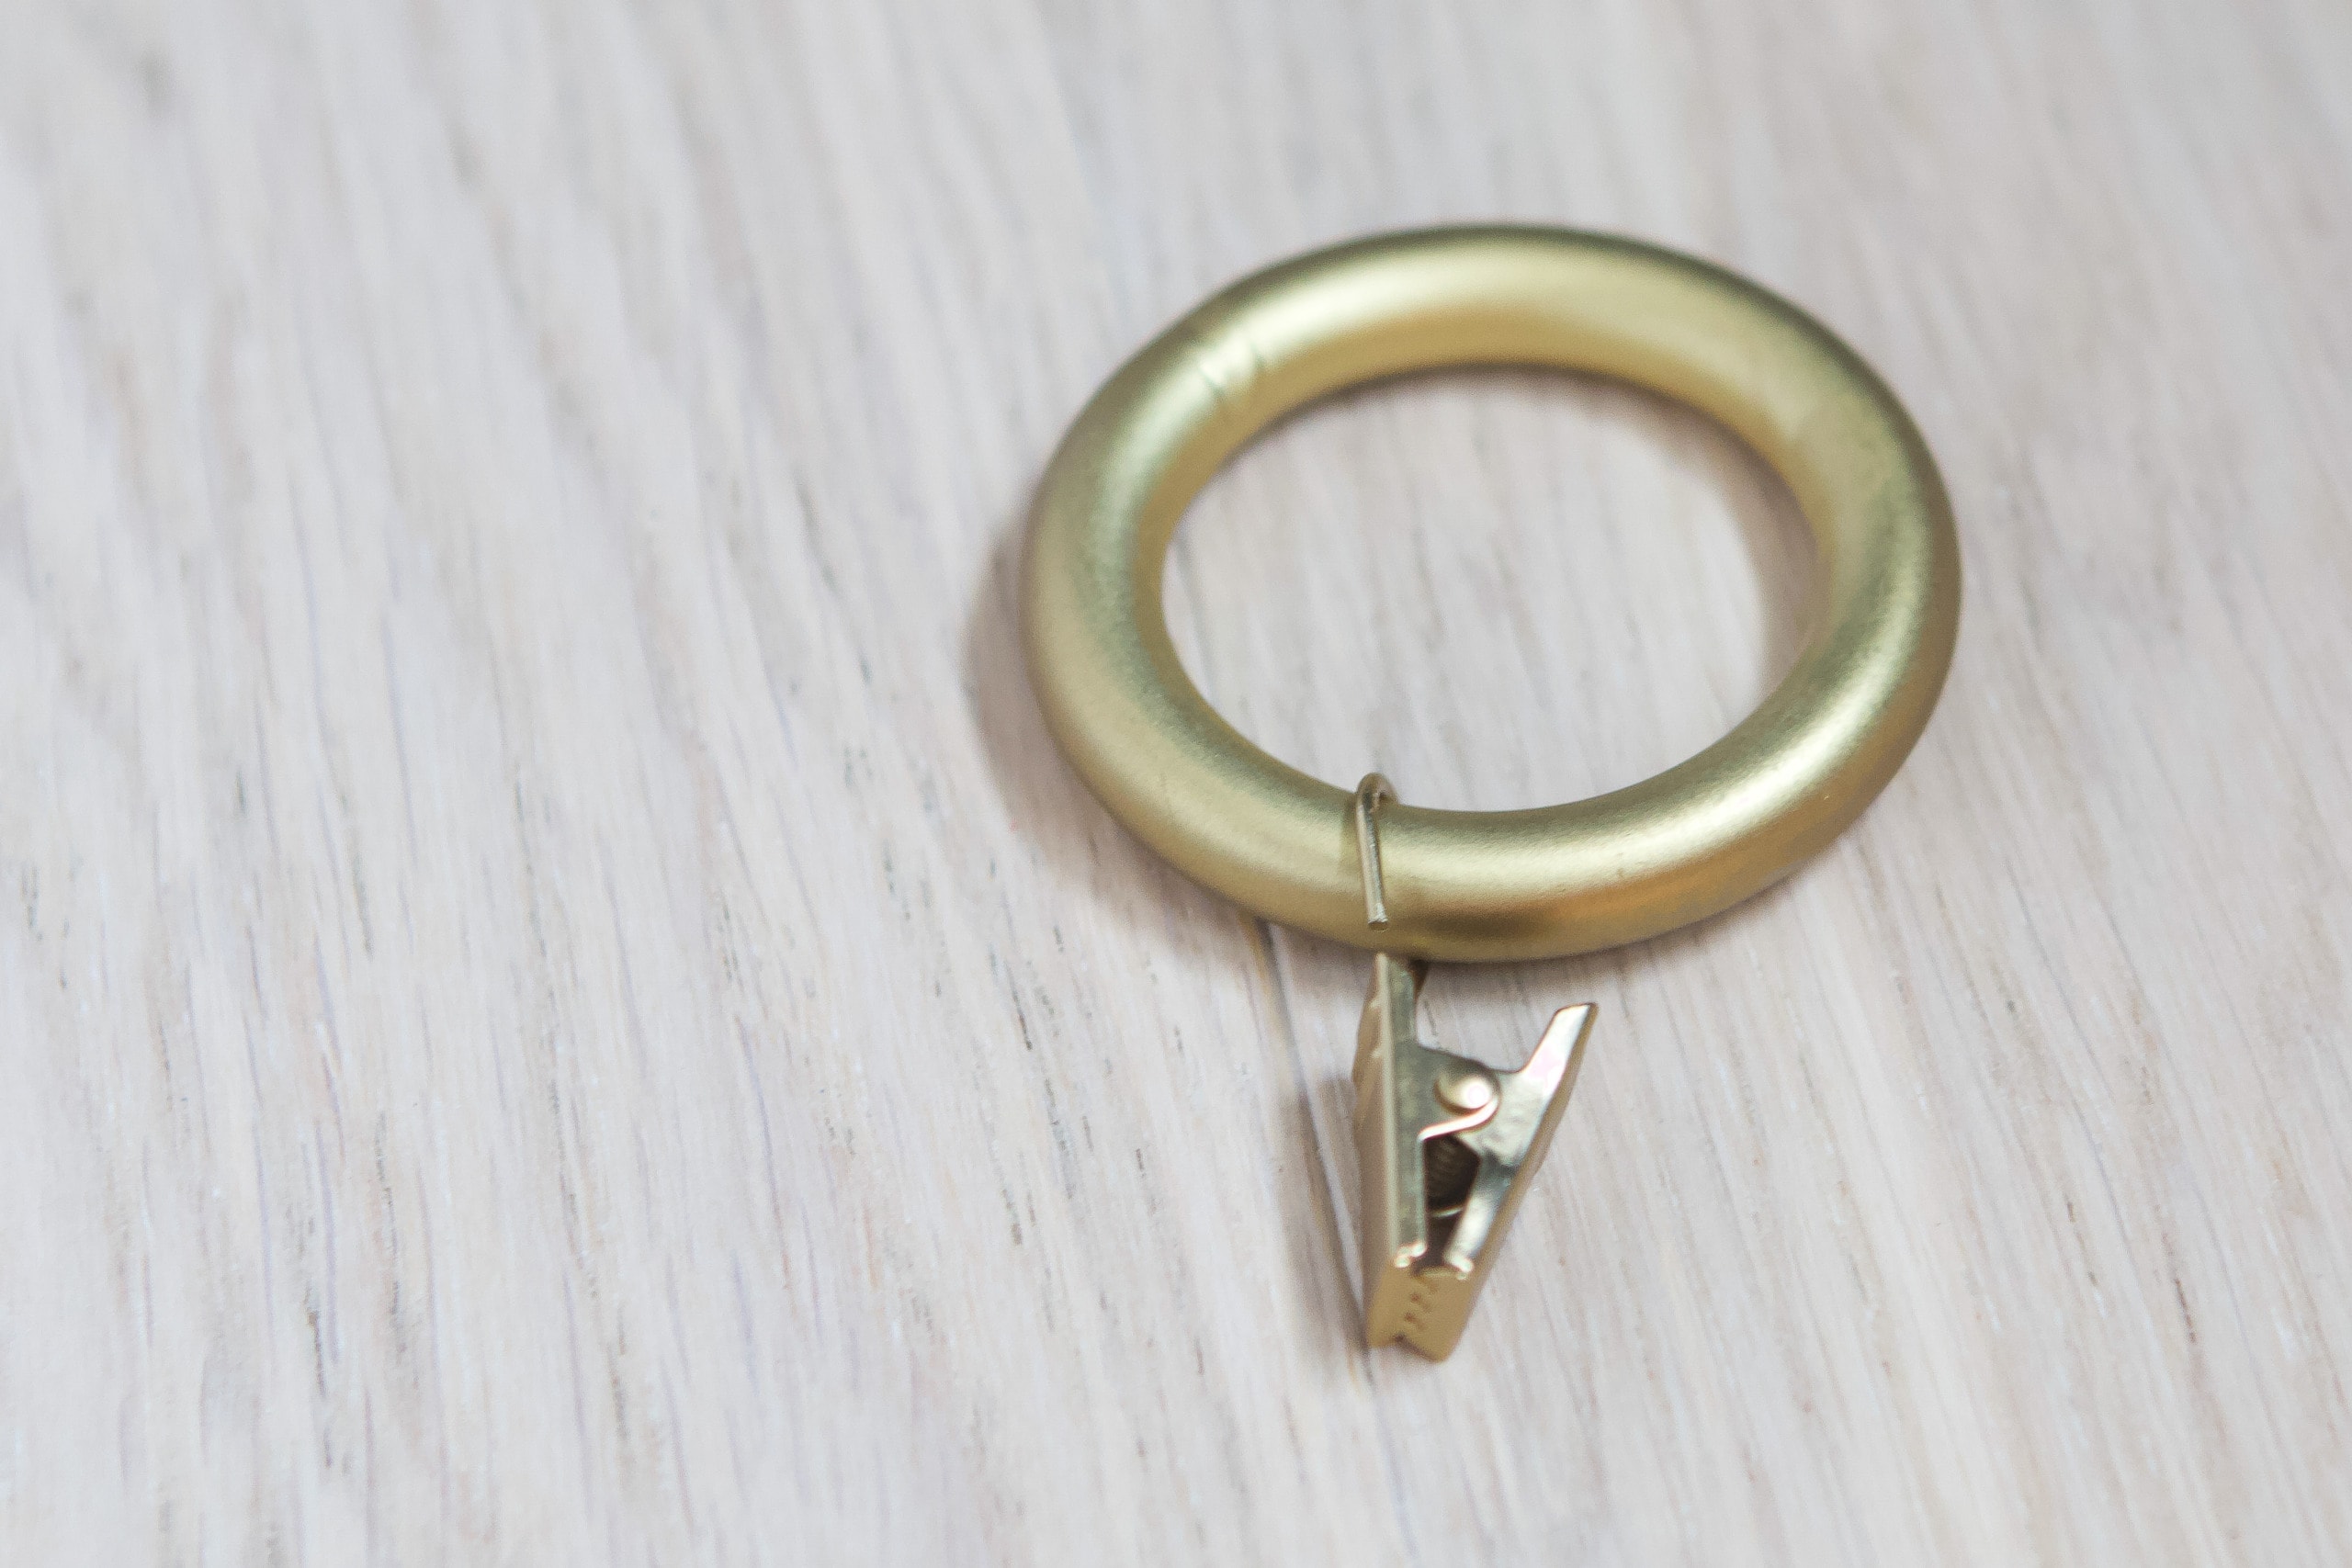 Curtain ring clips